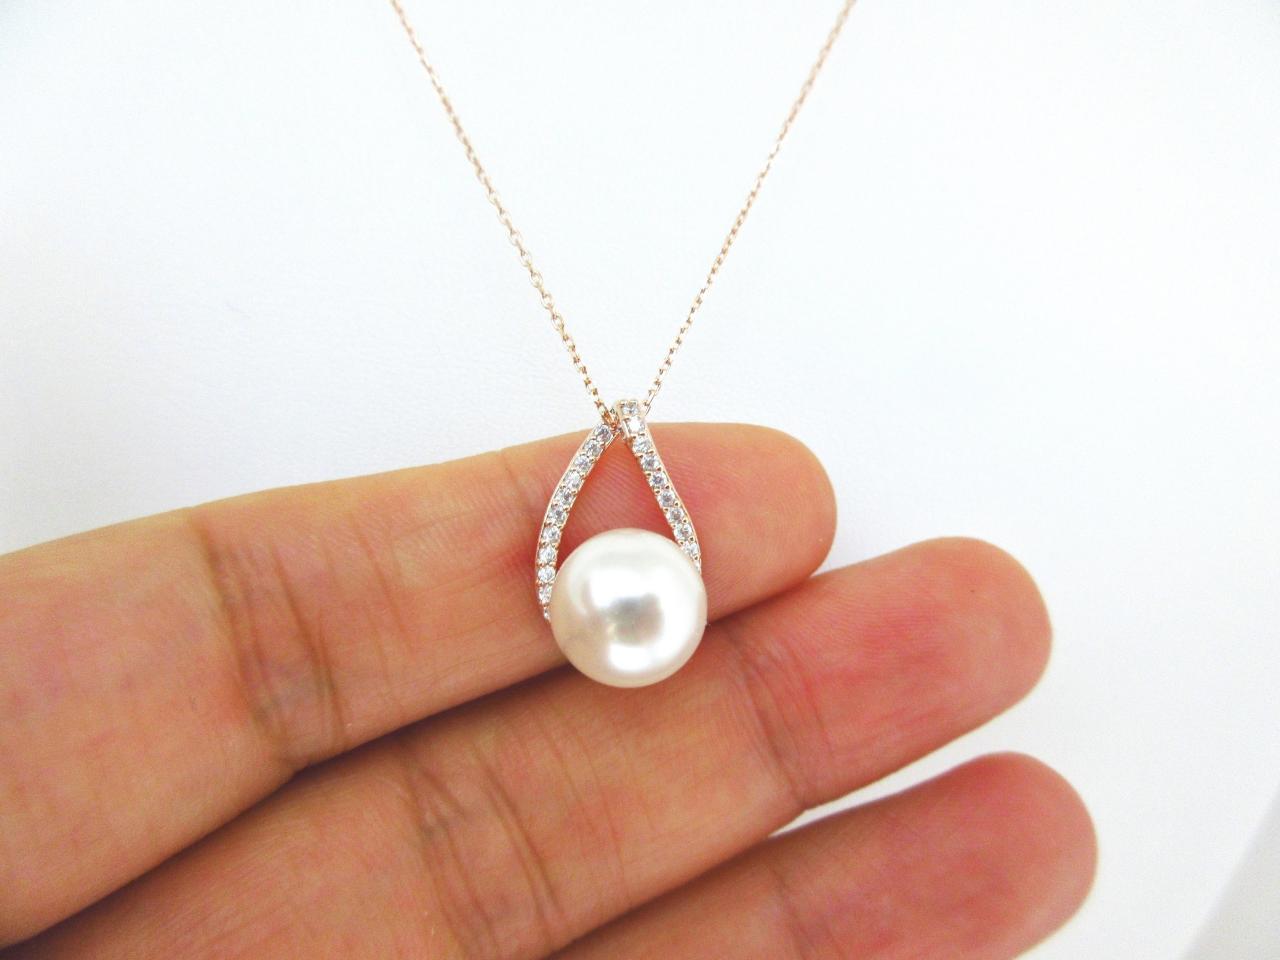 Bridal Pearl Necklace Rose Gold Cubic Zirconia Teardrop Swarovski 10mm Pearl Bridesmaid Gift Wedding Necklace Sterling Silver Chain (n029)